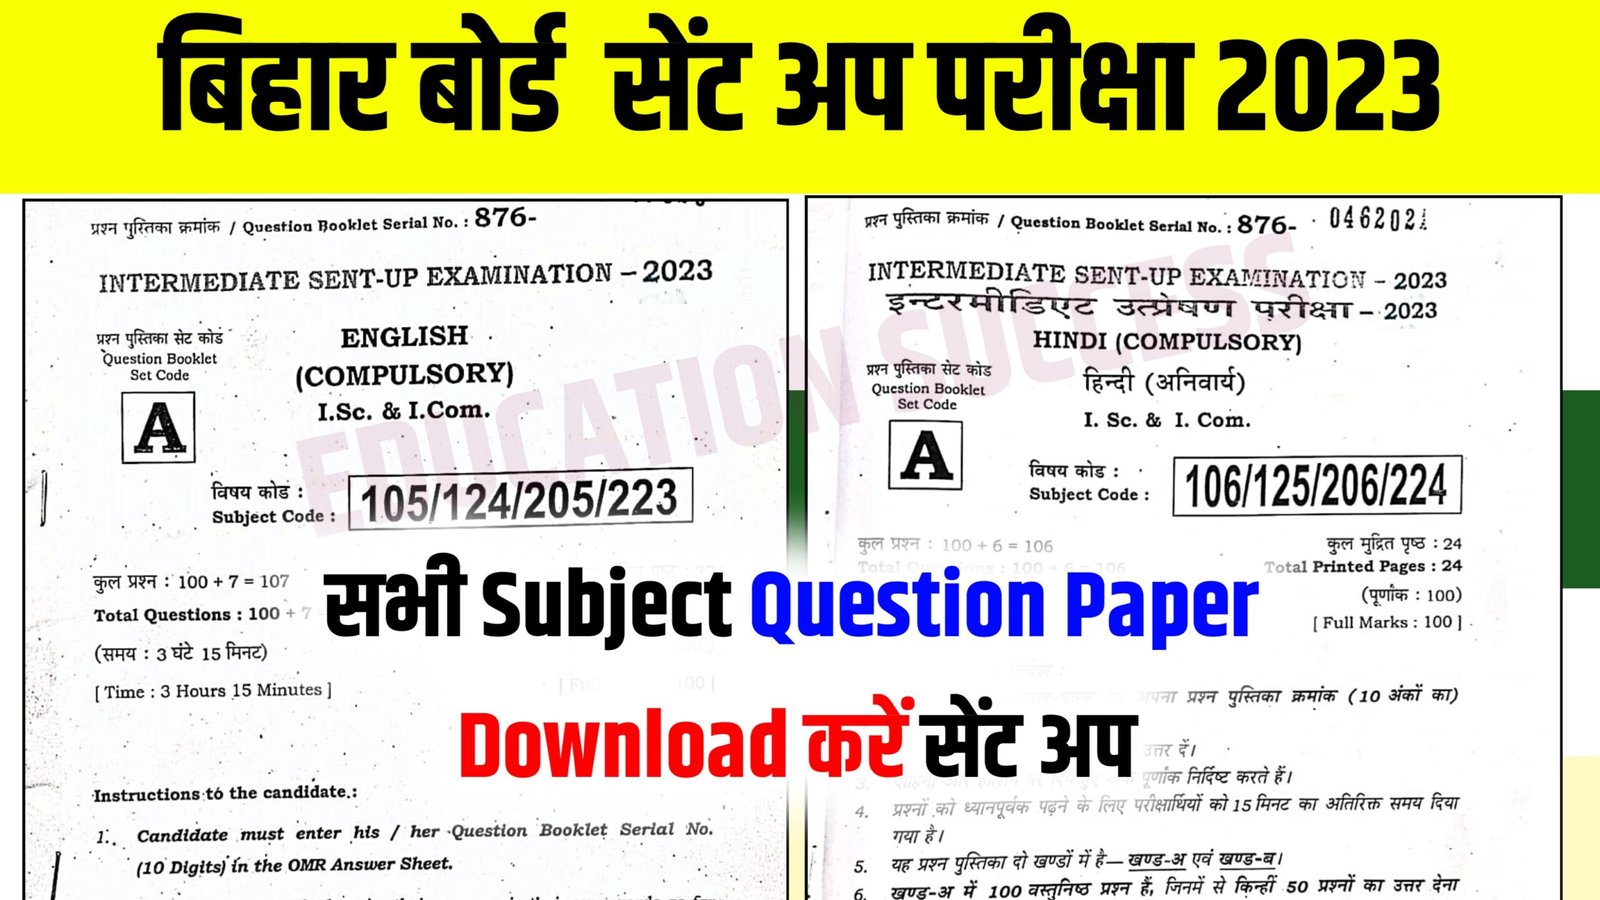 Bihar Board 12th Sent Up Viral Question Paper Download Now: